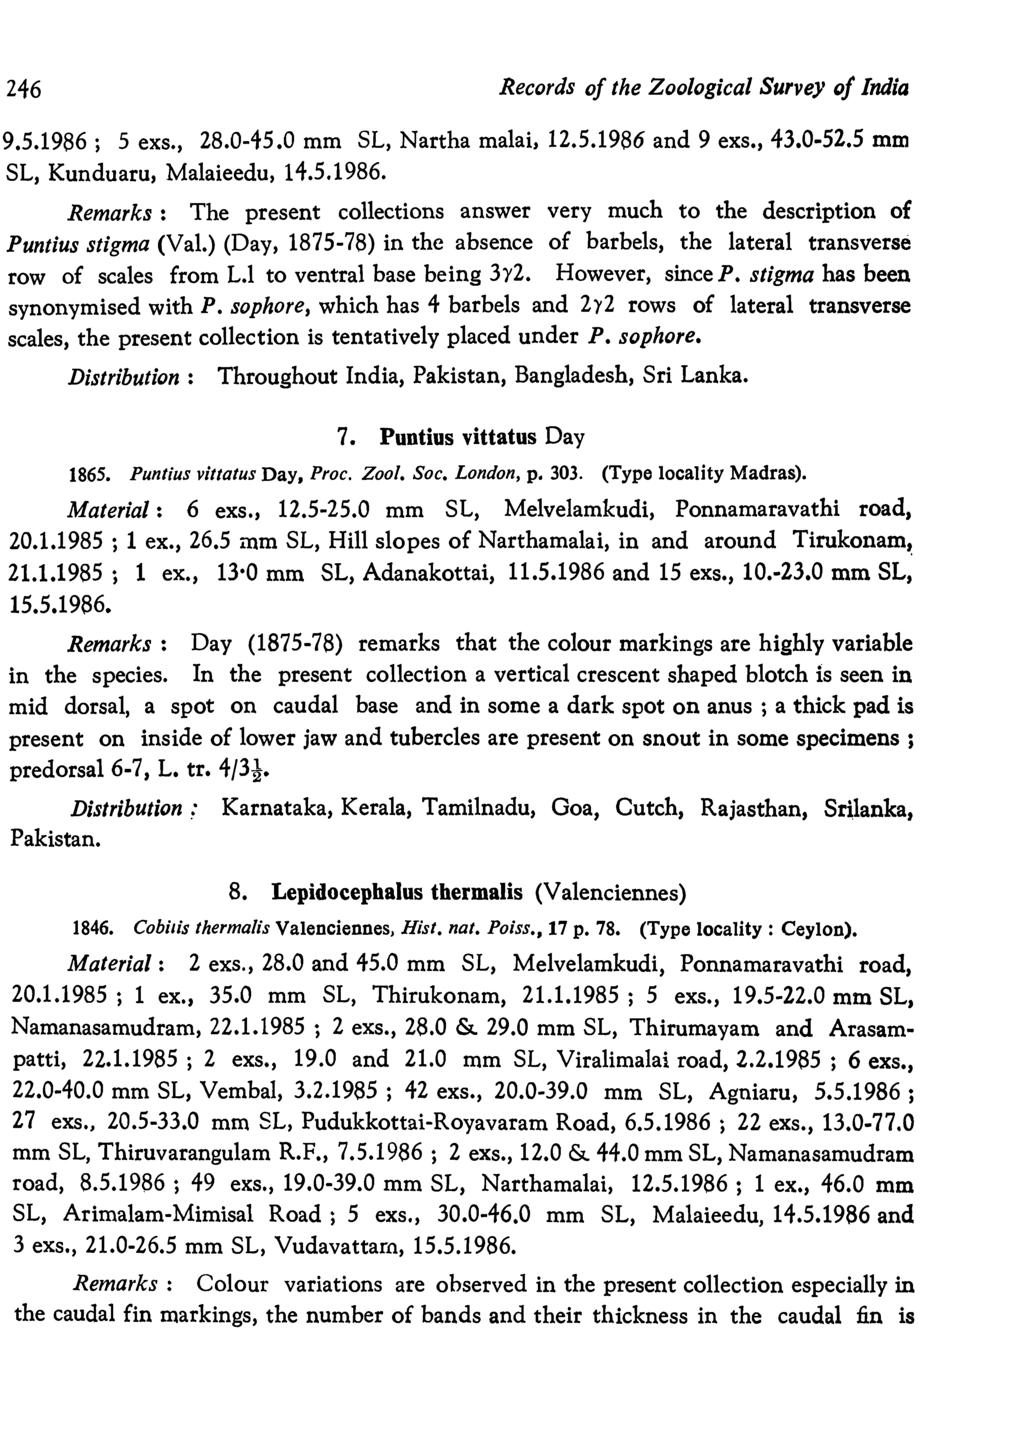 246 Records of the Zoological Survey of India 9.5.1986; 5 exs., 28.0-45.0 mm SL, Nartha malai, 12.5.1986 and 9 exs., 43.0-52.5 mm SL, Kunduaru, Malaieedu, 14.5.1986. Remarks: The present collections answer very much to the description of Puntius stigma (Val.